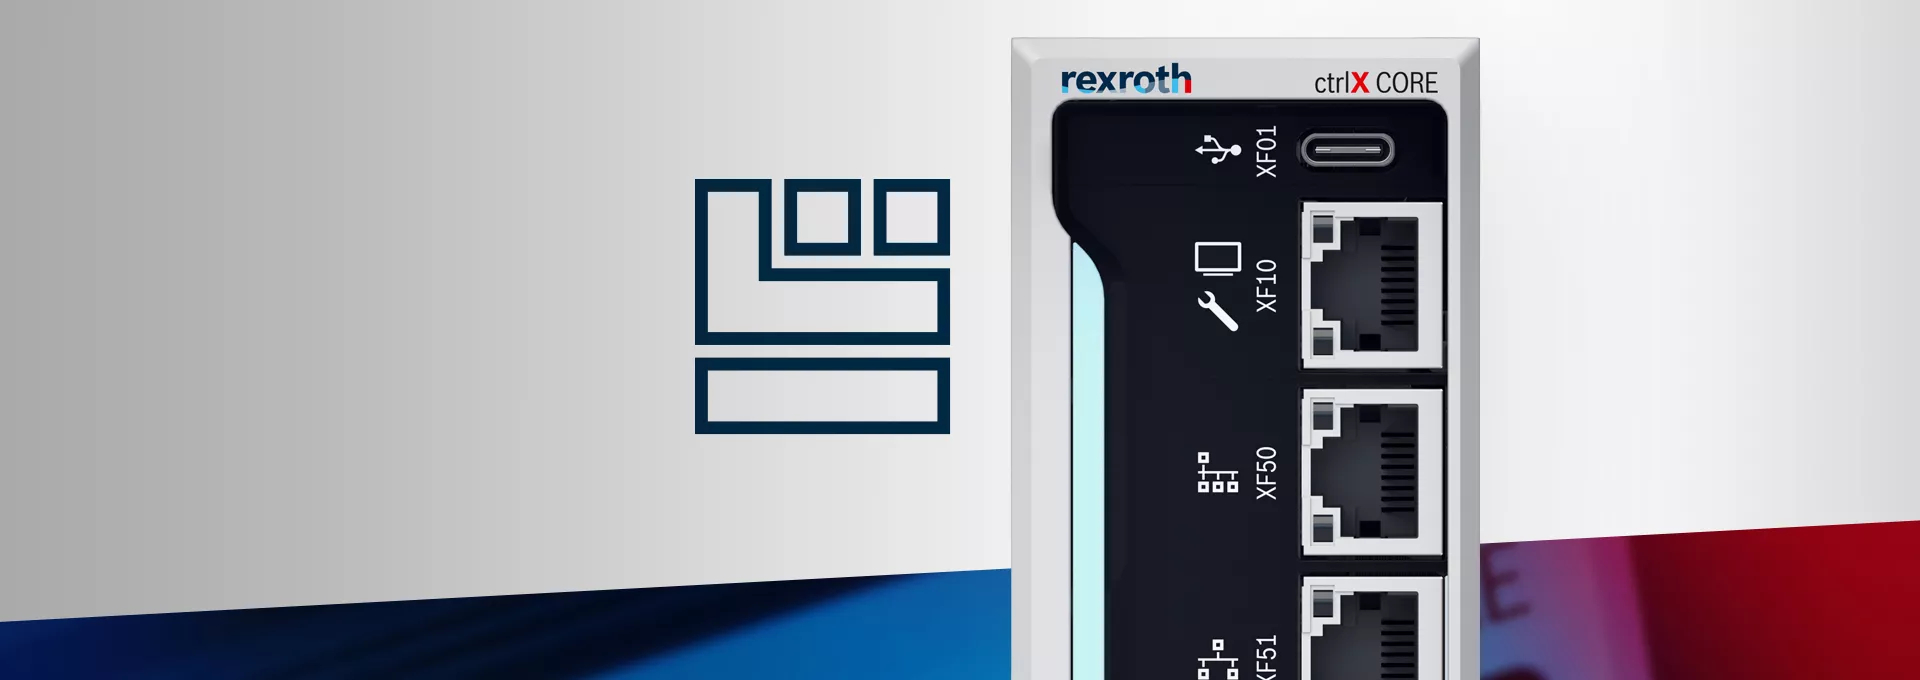 DCS Bosch Rexroth Presents ctrlX OS Operating System Now Available 2 1920x680